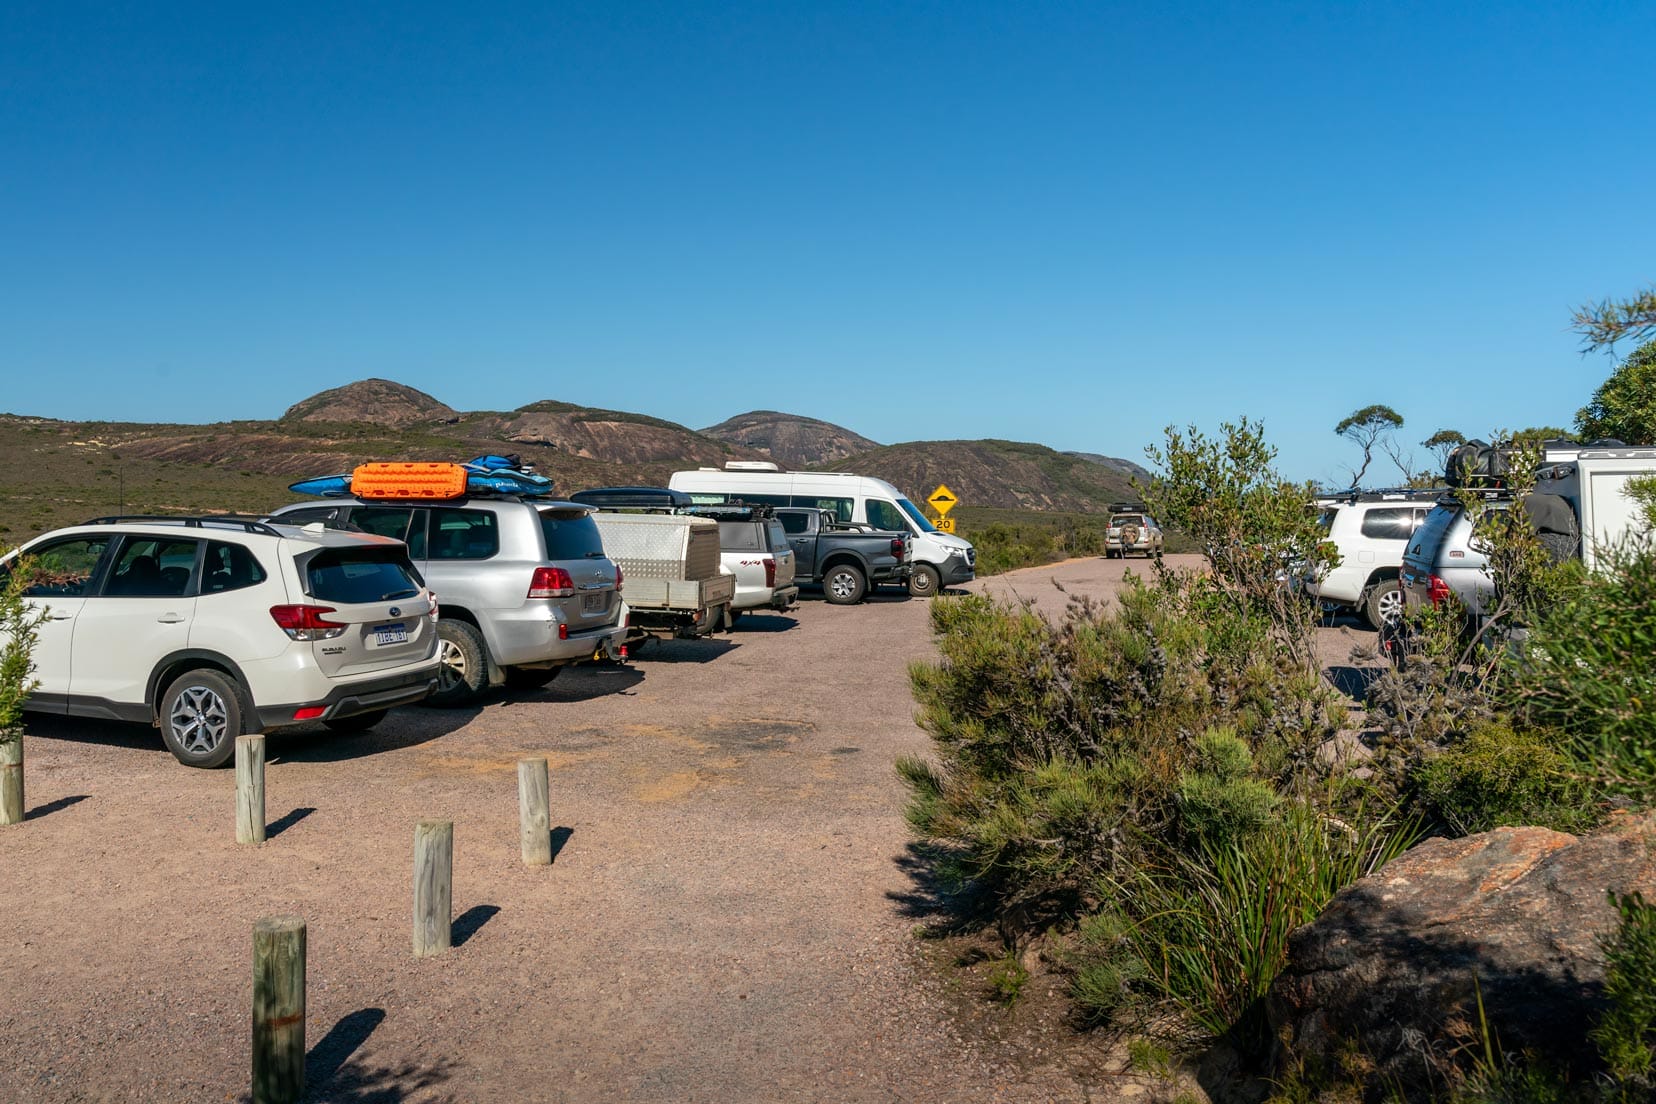 The full car park at Frenchman Peak - about 12 cars 